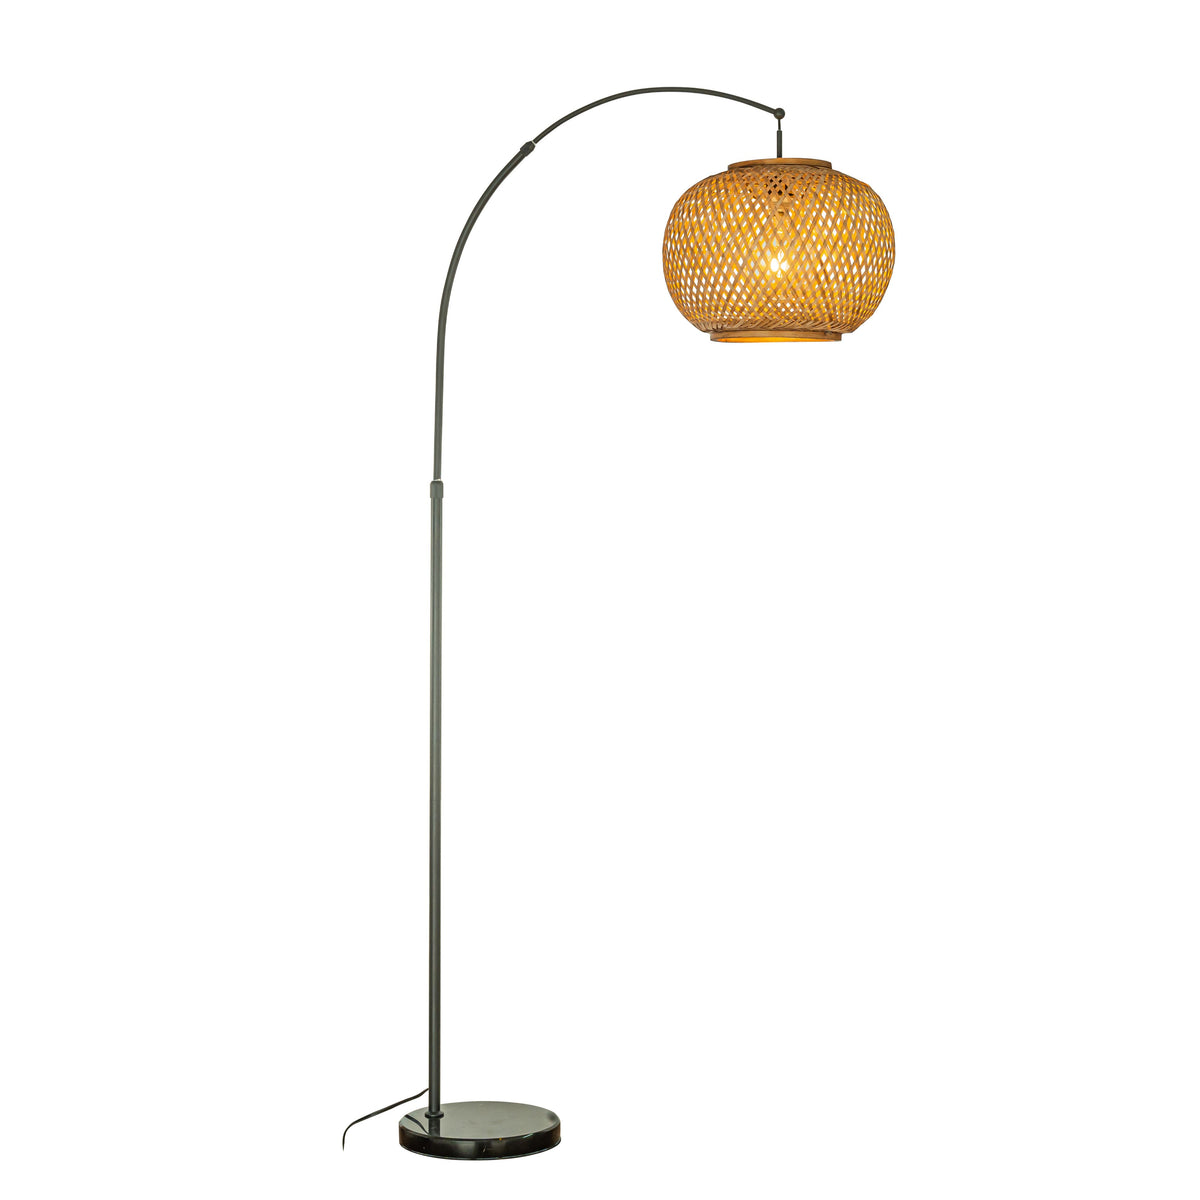 75" Black Arc Floor Lamp with Bamboo Shade and Marble Base